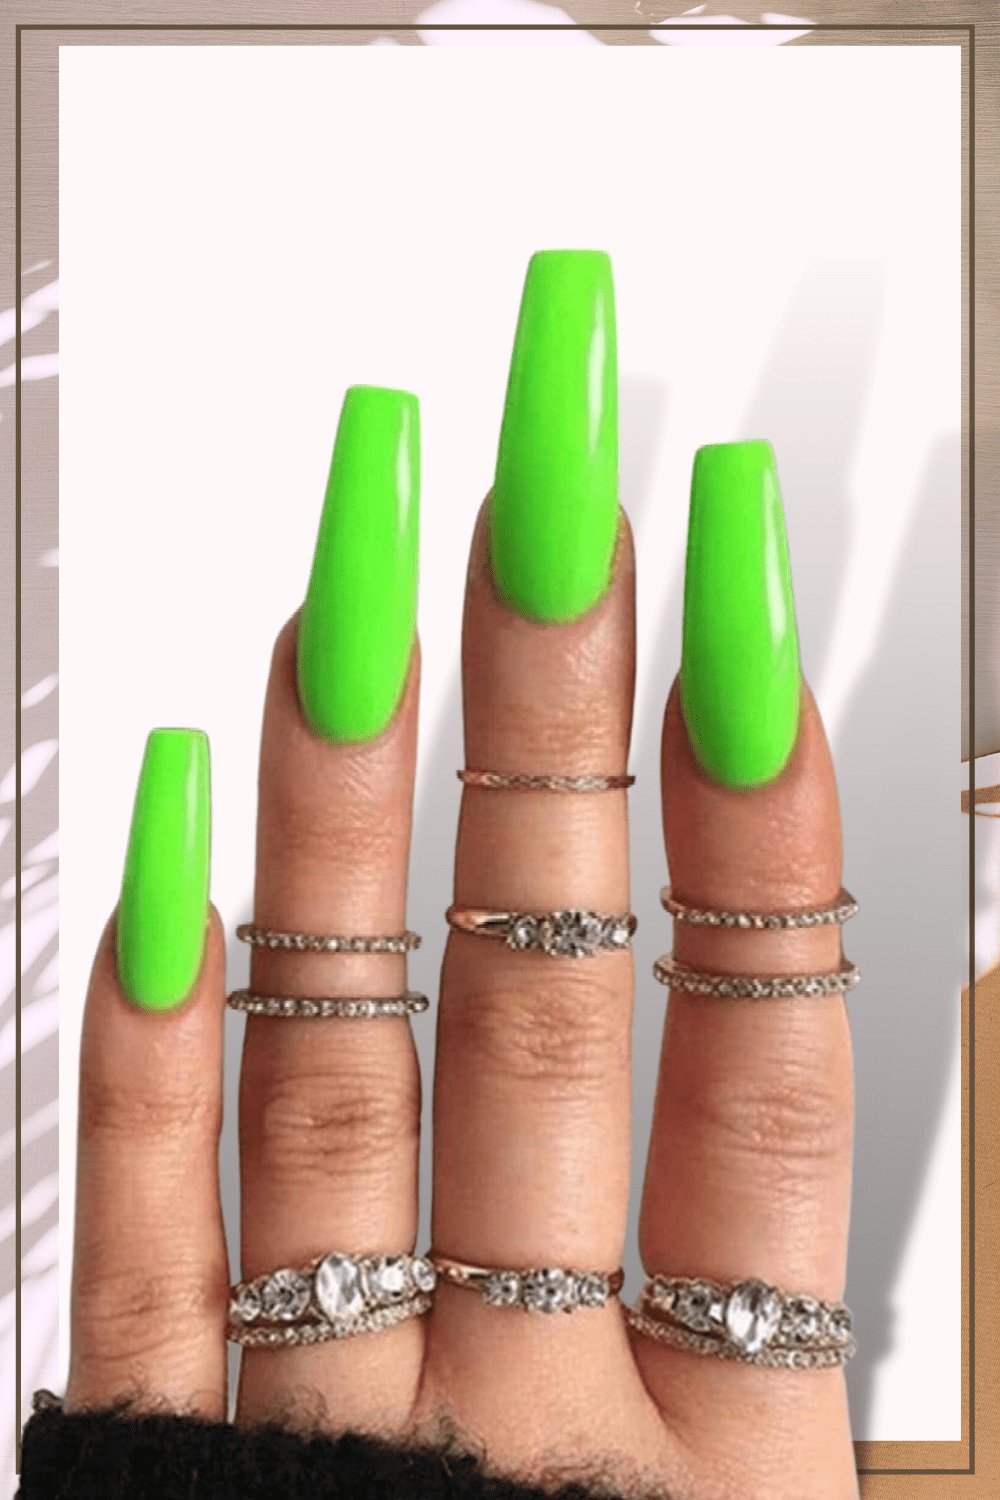 Cardi B With Neon Green Nails | Billie Eilish, Rihanna, and Cardi B Have  All Worn This Summer's Hottest Nail Colour Trend | POPSUGAR Beauty UK Photo  5